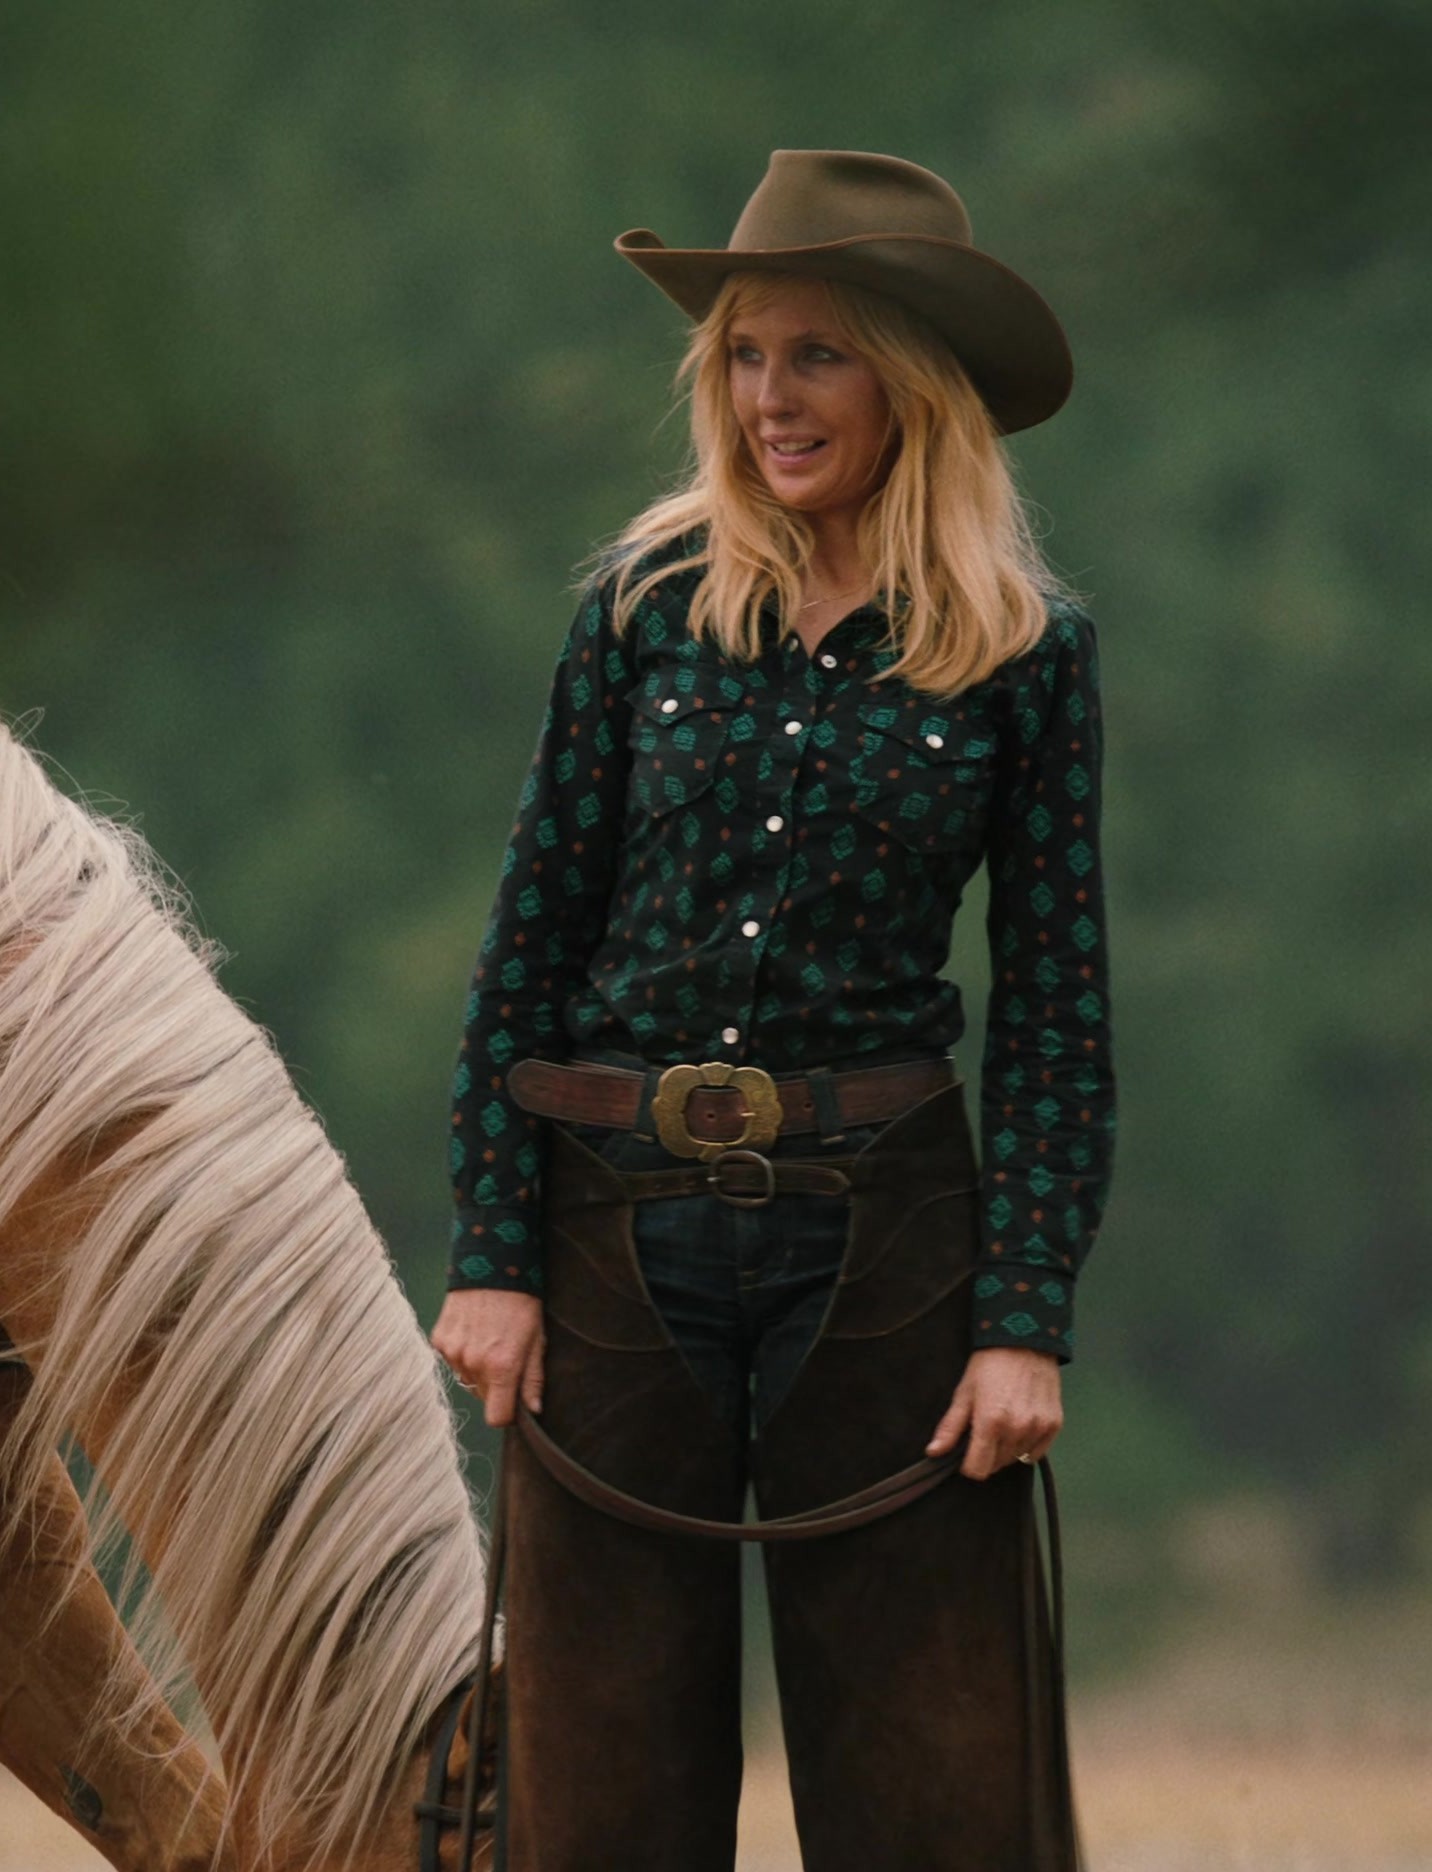 Worn on Yellowstone TV Show - Green Patterned Western Button-Up Shirt Worn by Kelly Reilly as Bethany "Beth" Dutton